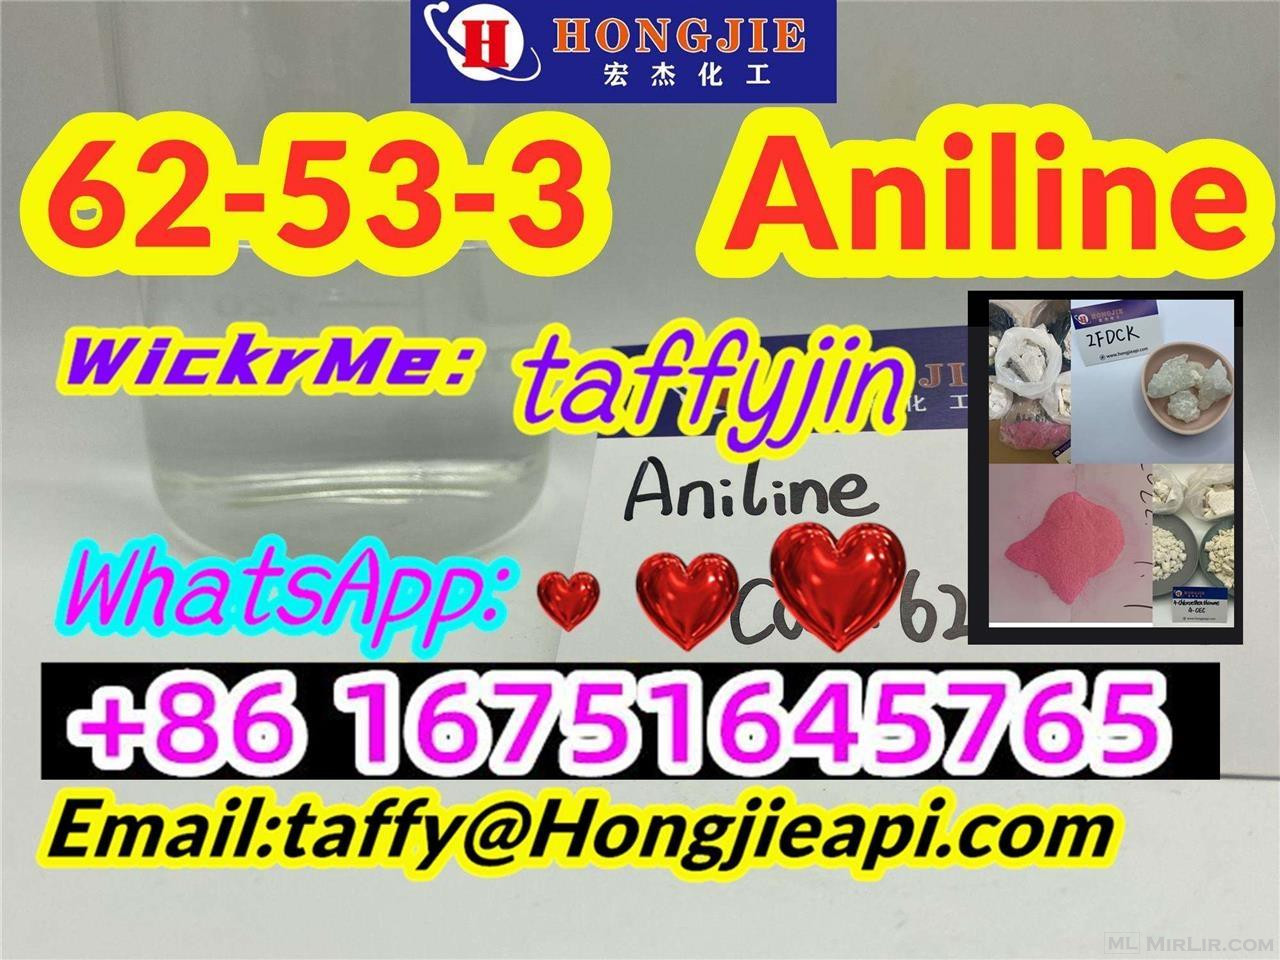 62-53-3，Aniline Tap my phone number，search on Google，you can